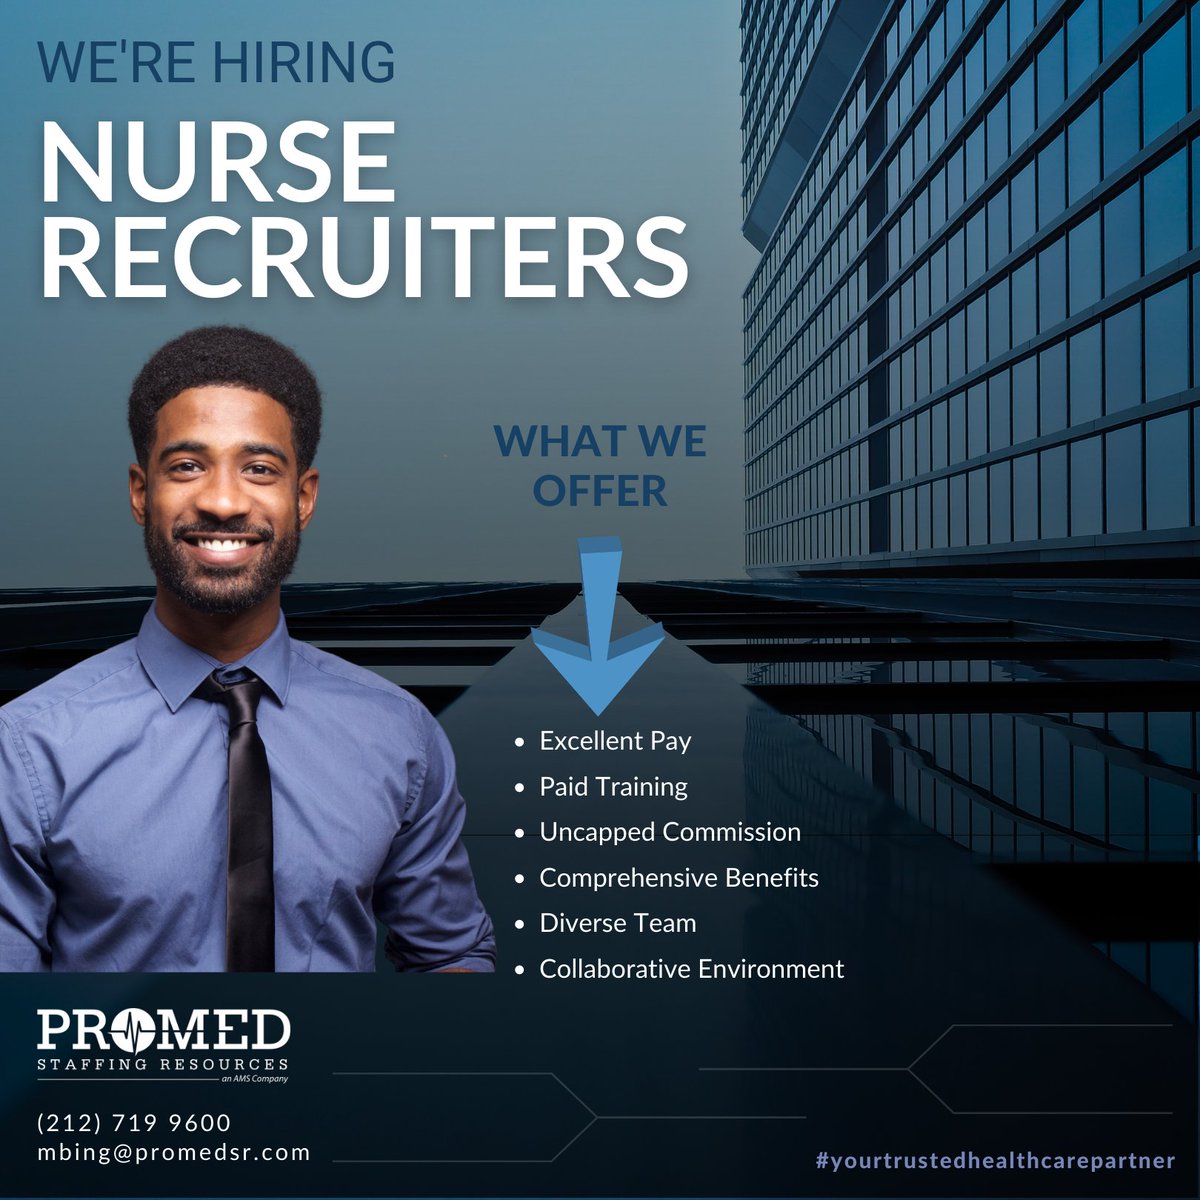 It's time to reach new heights with your recruiting career! ProMed Staffing Resources is seeking experienced #nurserecruiters. Don't hesitate - email Maria Bingeman at mbing@promedsr.com

#healthcarestaffing #nurserecruiting #nursestaffing #applicanttrackingsystem #promedsr